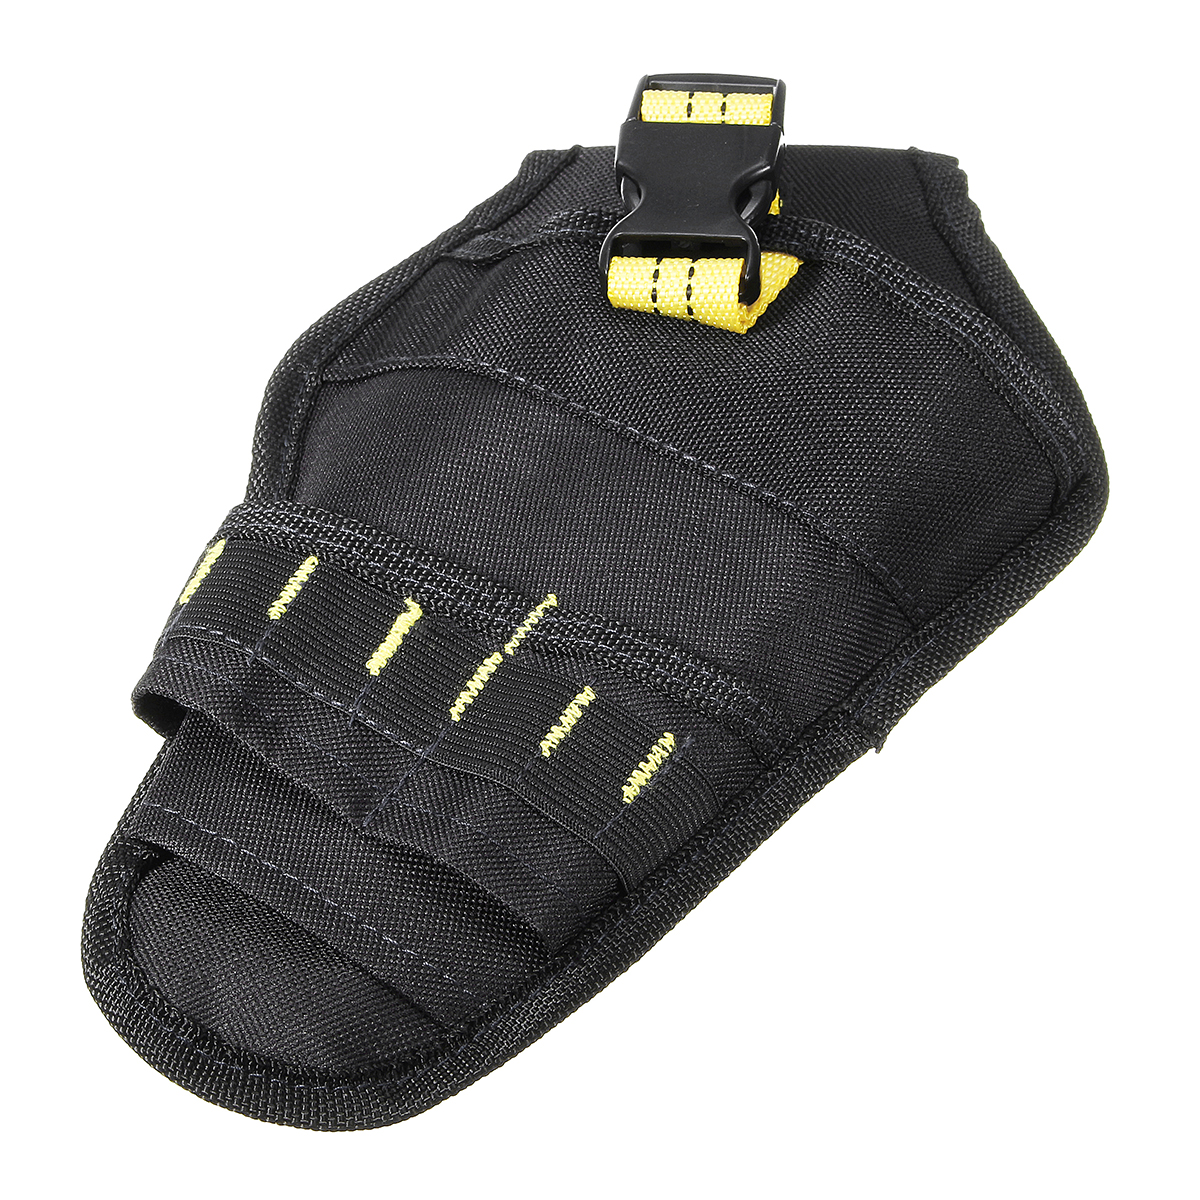 Heavy-Duty-Cordless-Impact-Drill-Holster-Tool-Bag-Belt-Pouch-Pocket-Holder-1187146-4